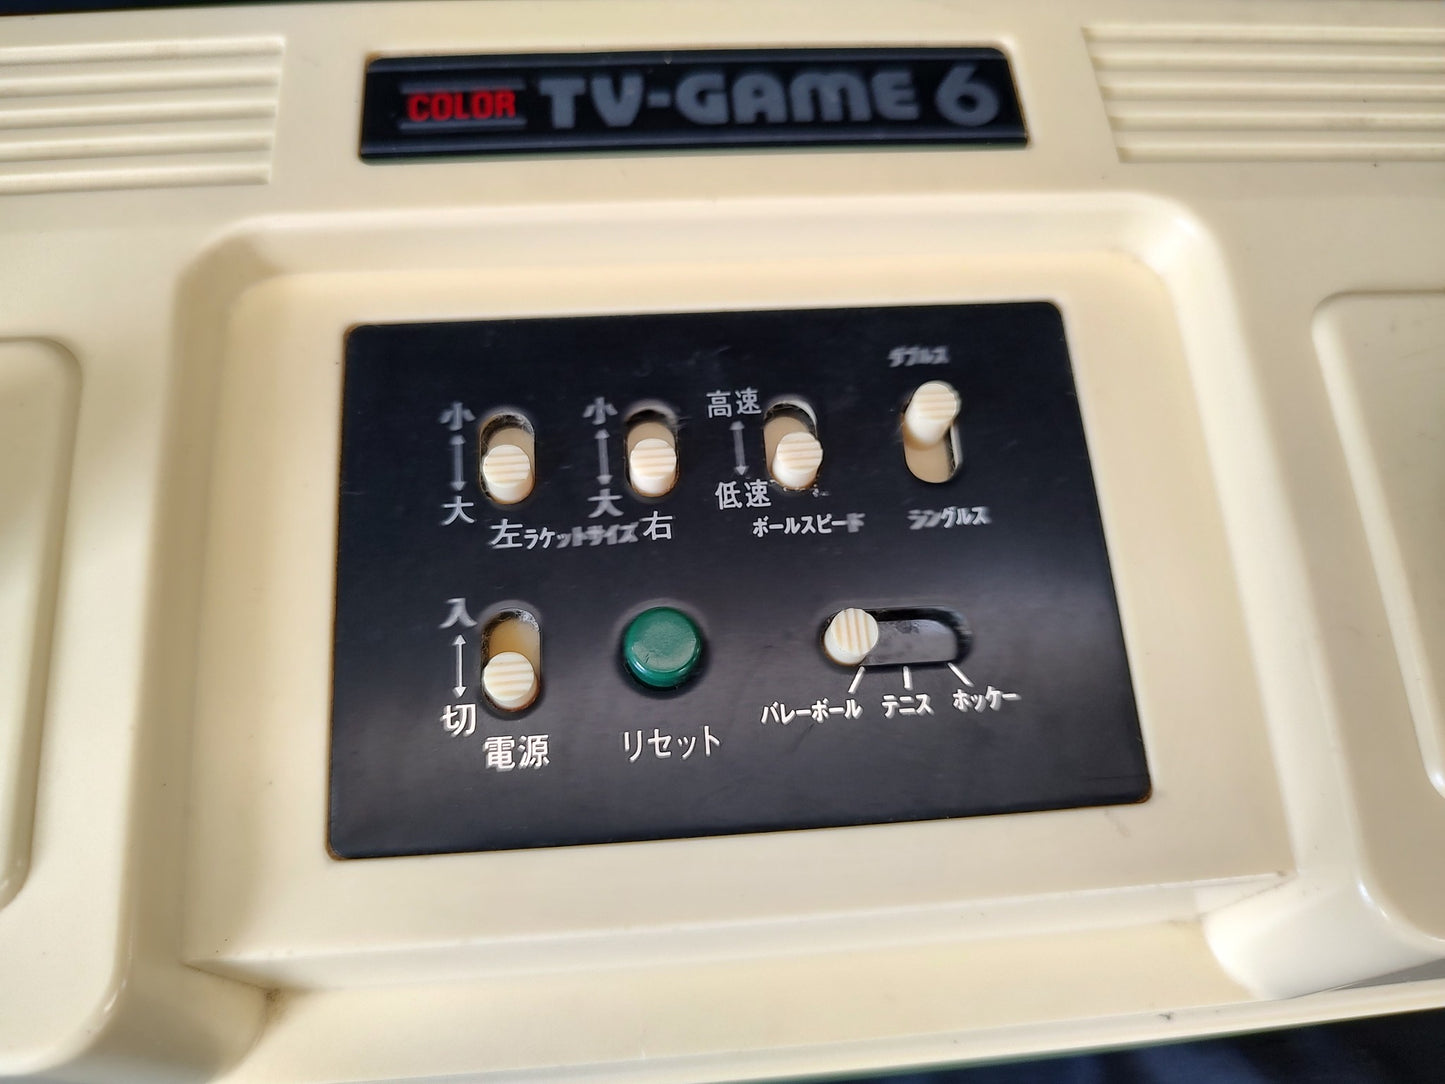 Defective Nintendo TV GAME 6 (CTG-6S) console system, Working -g0318-5